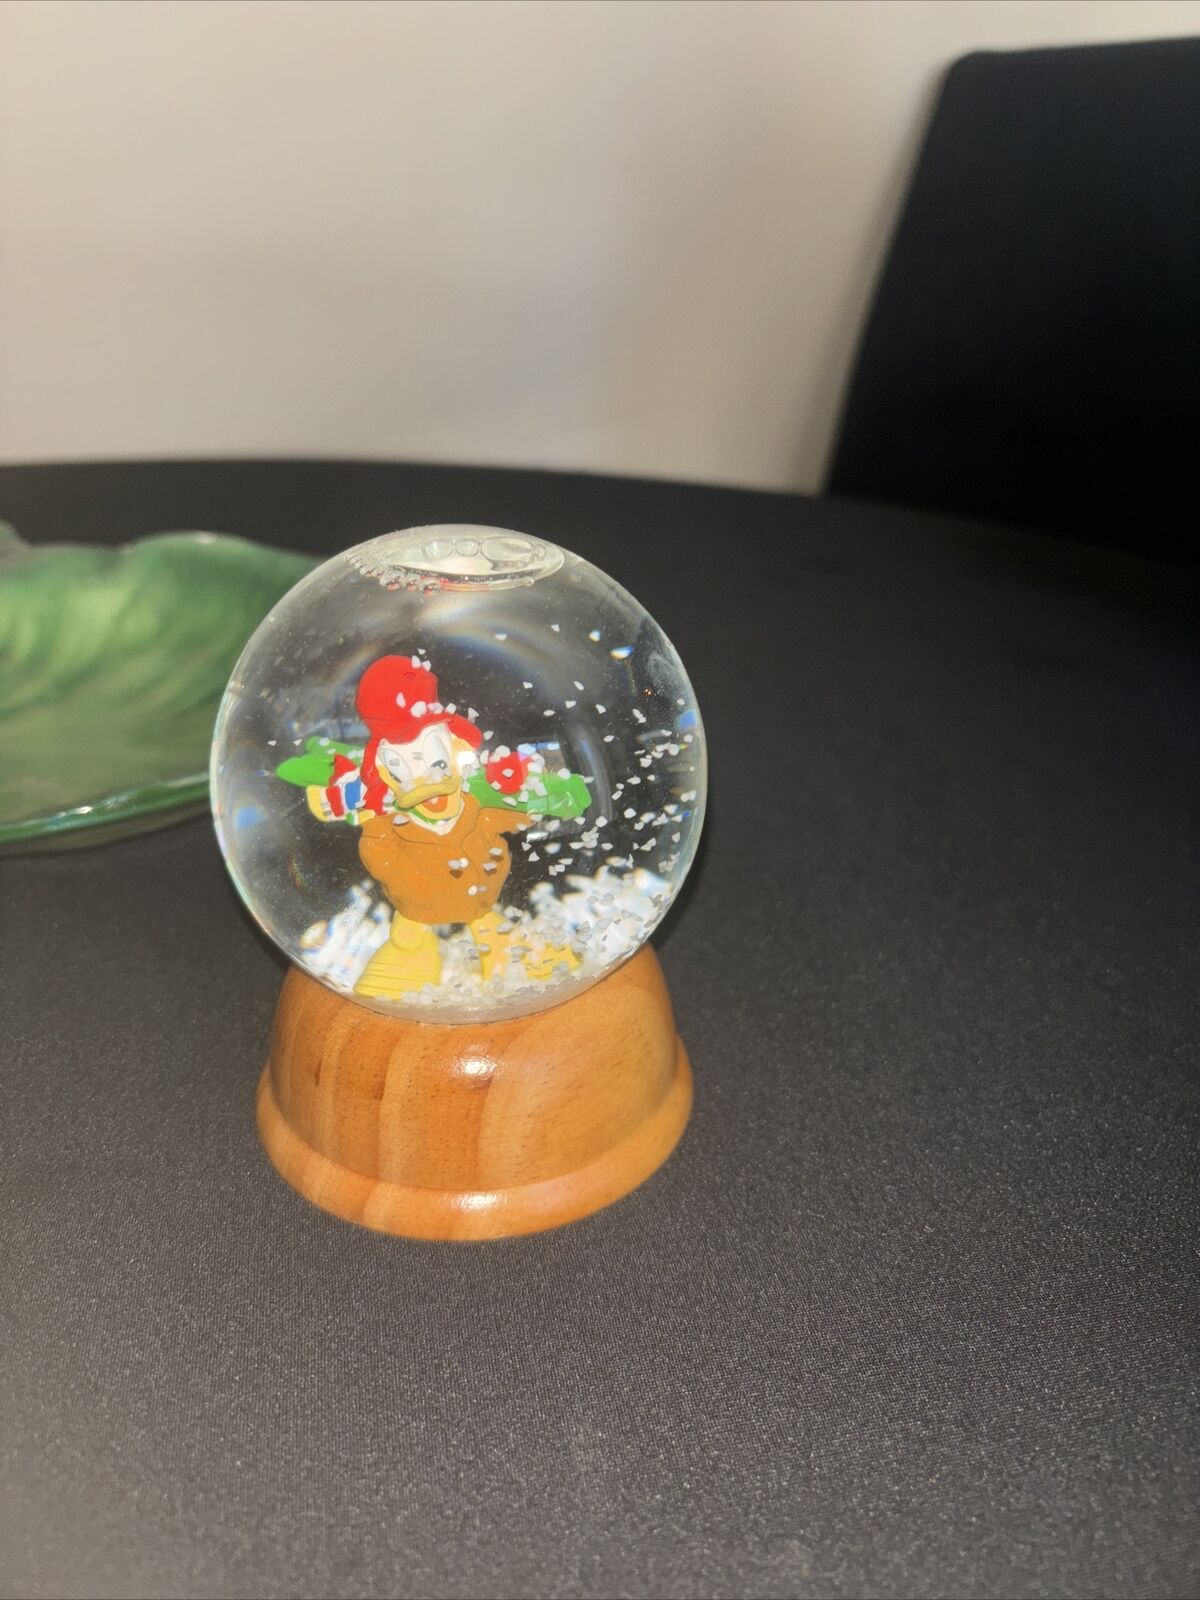 Disney Donald Duck And Scrooge Disney Snow globes First Edition -2 Globes